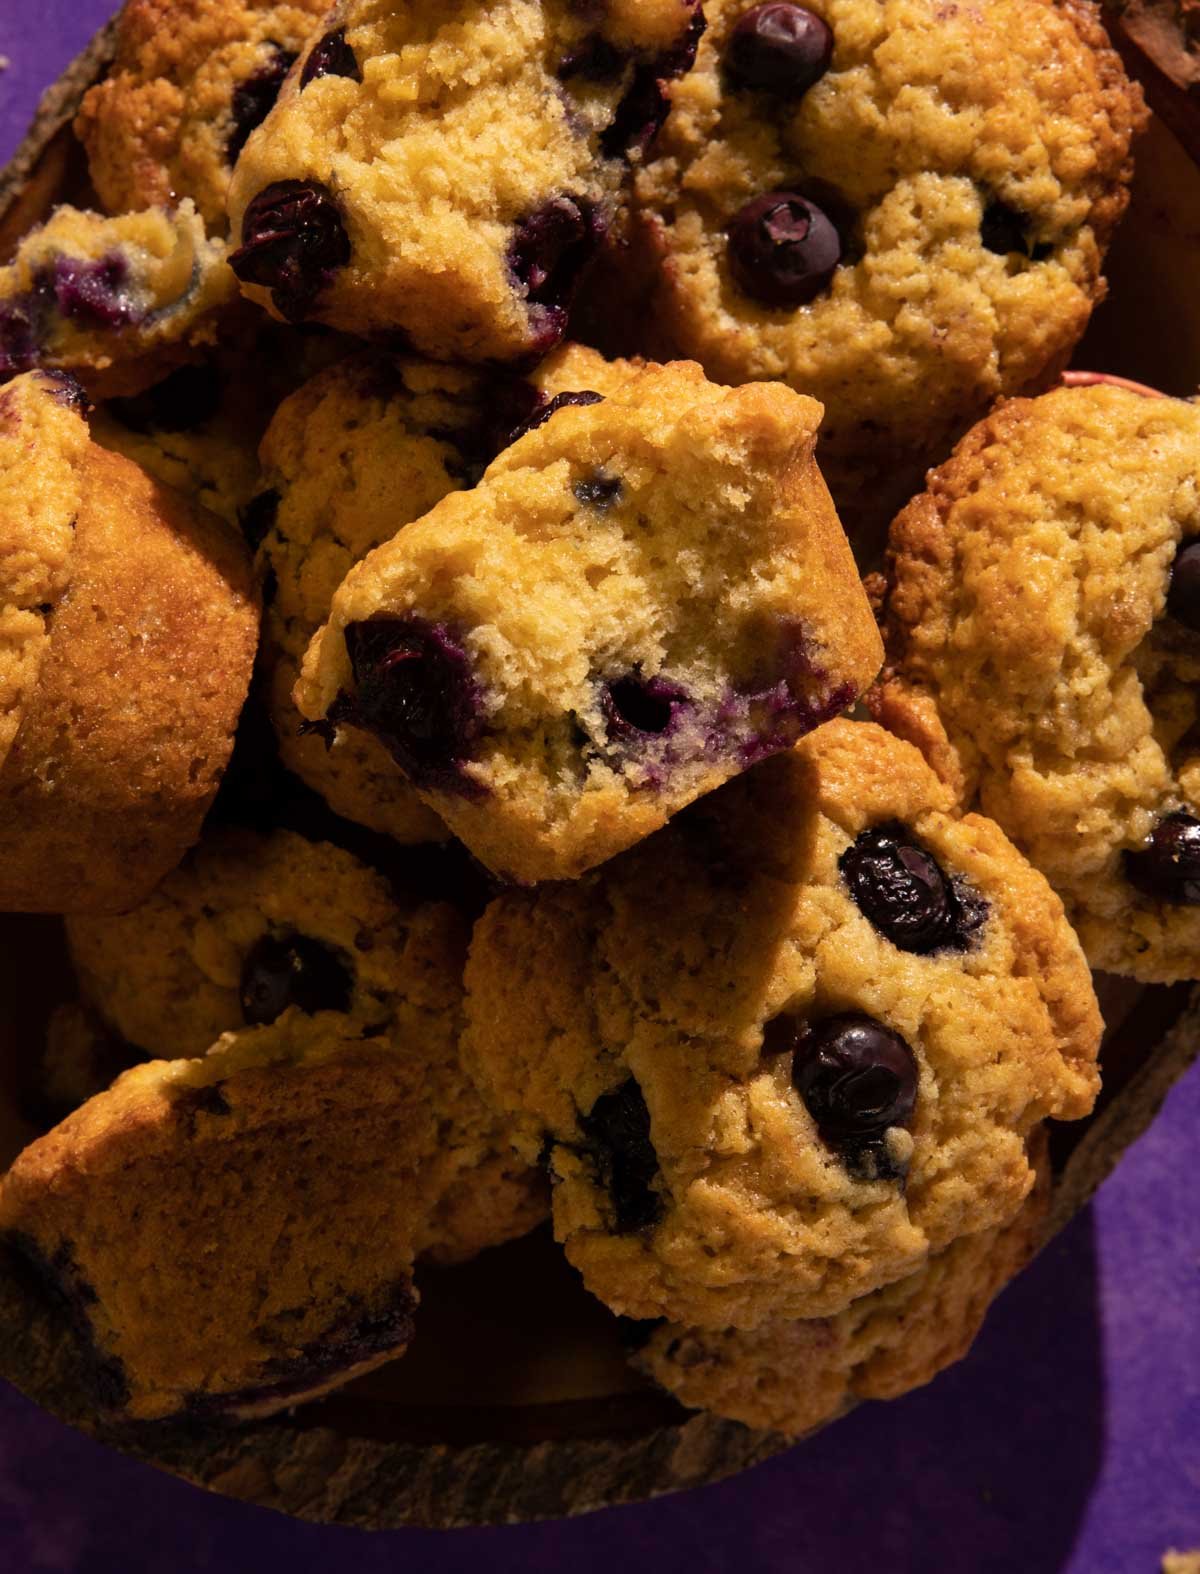 Blueberry muffins in a pile with a bite taken out of one.